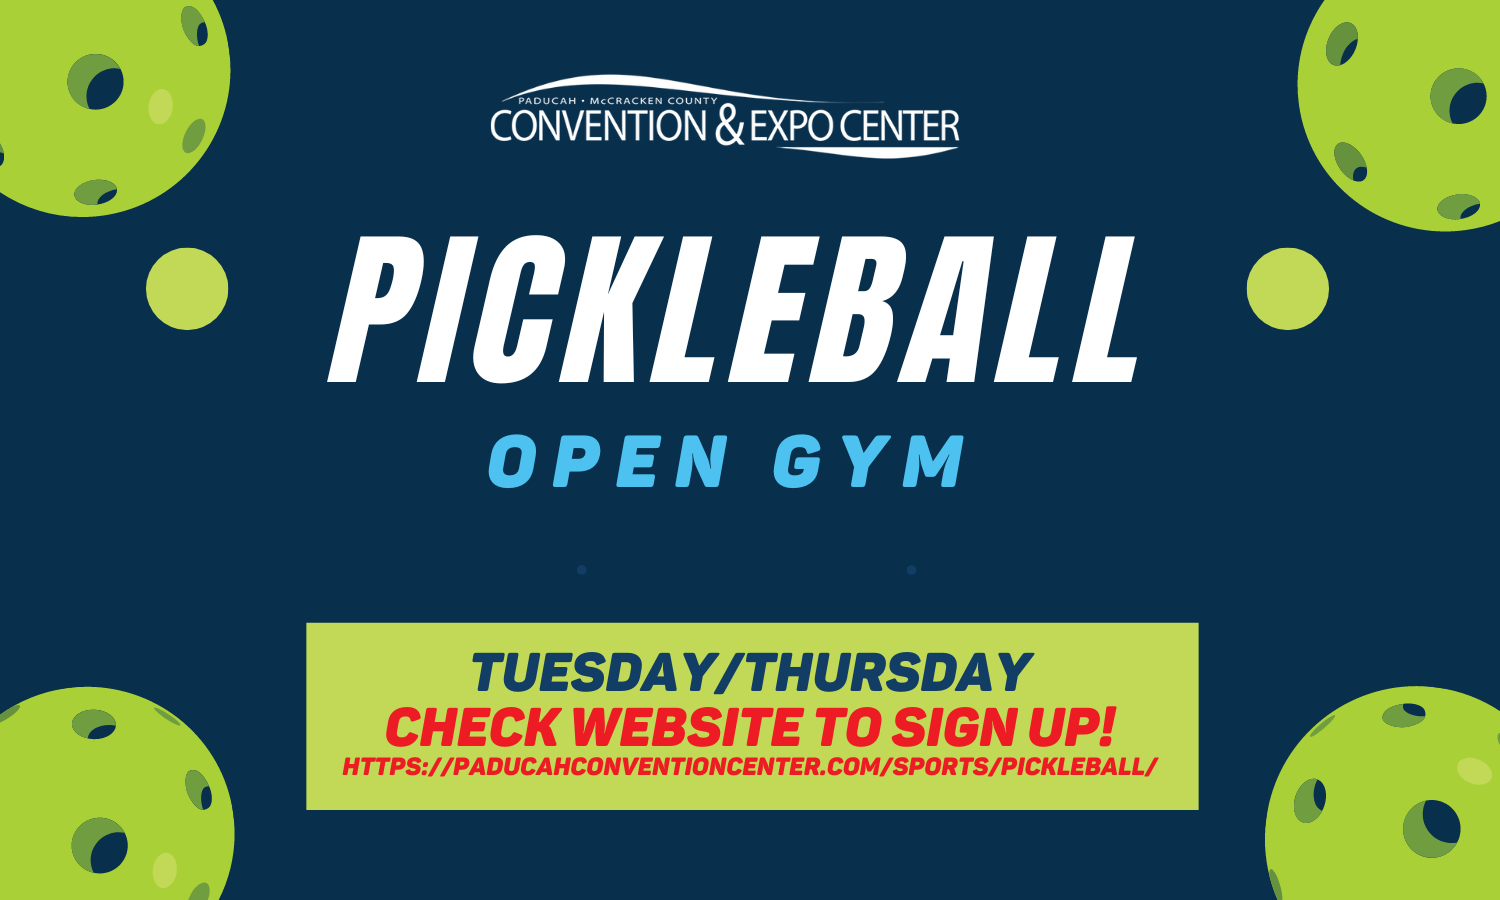 A rectangular graphic that says Paducah Pickleball along with the logo for the Paducah-McCracken Co. Convention & Expo Center where there is Paducah Pickleball open gym.